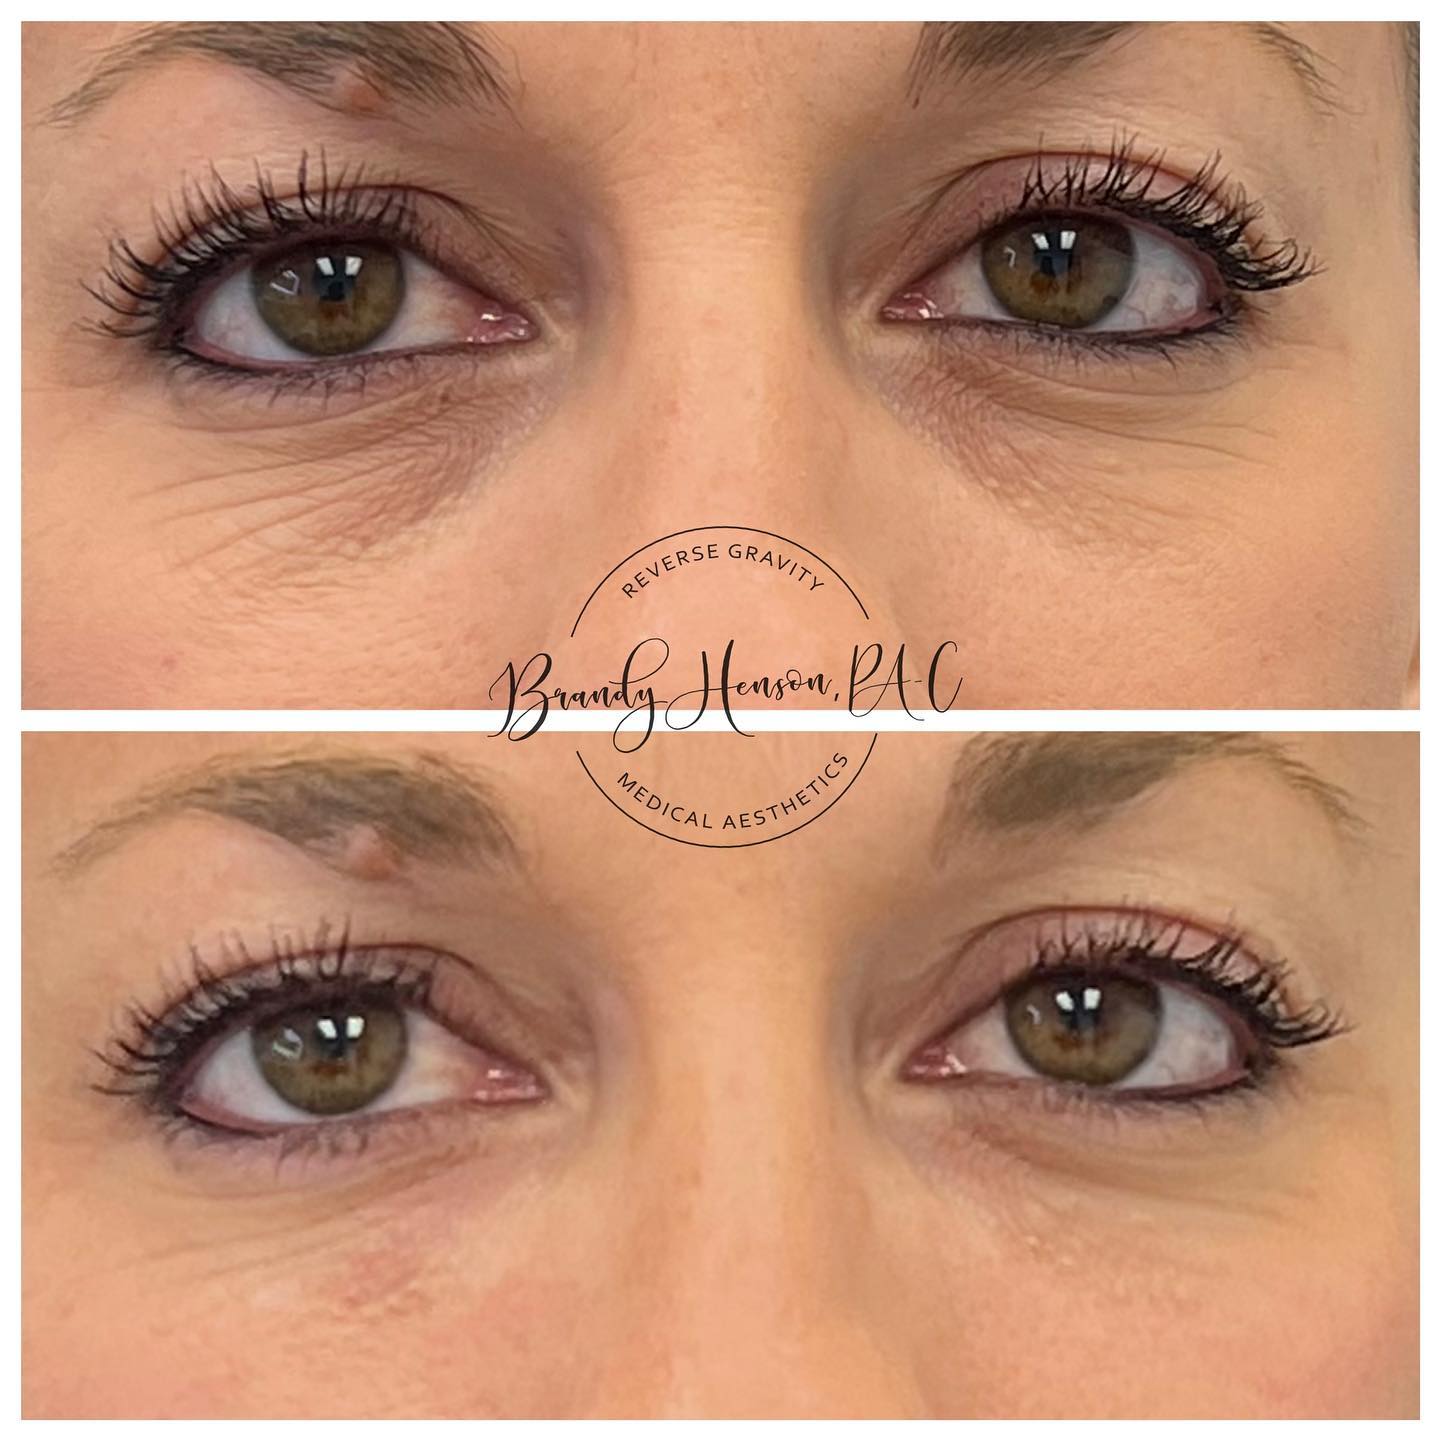 Undereye filler before and after